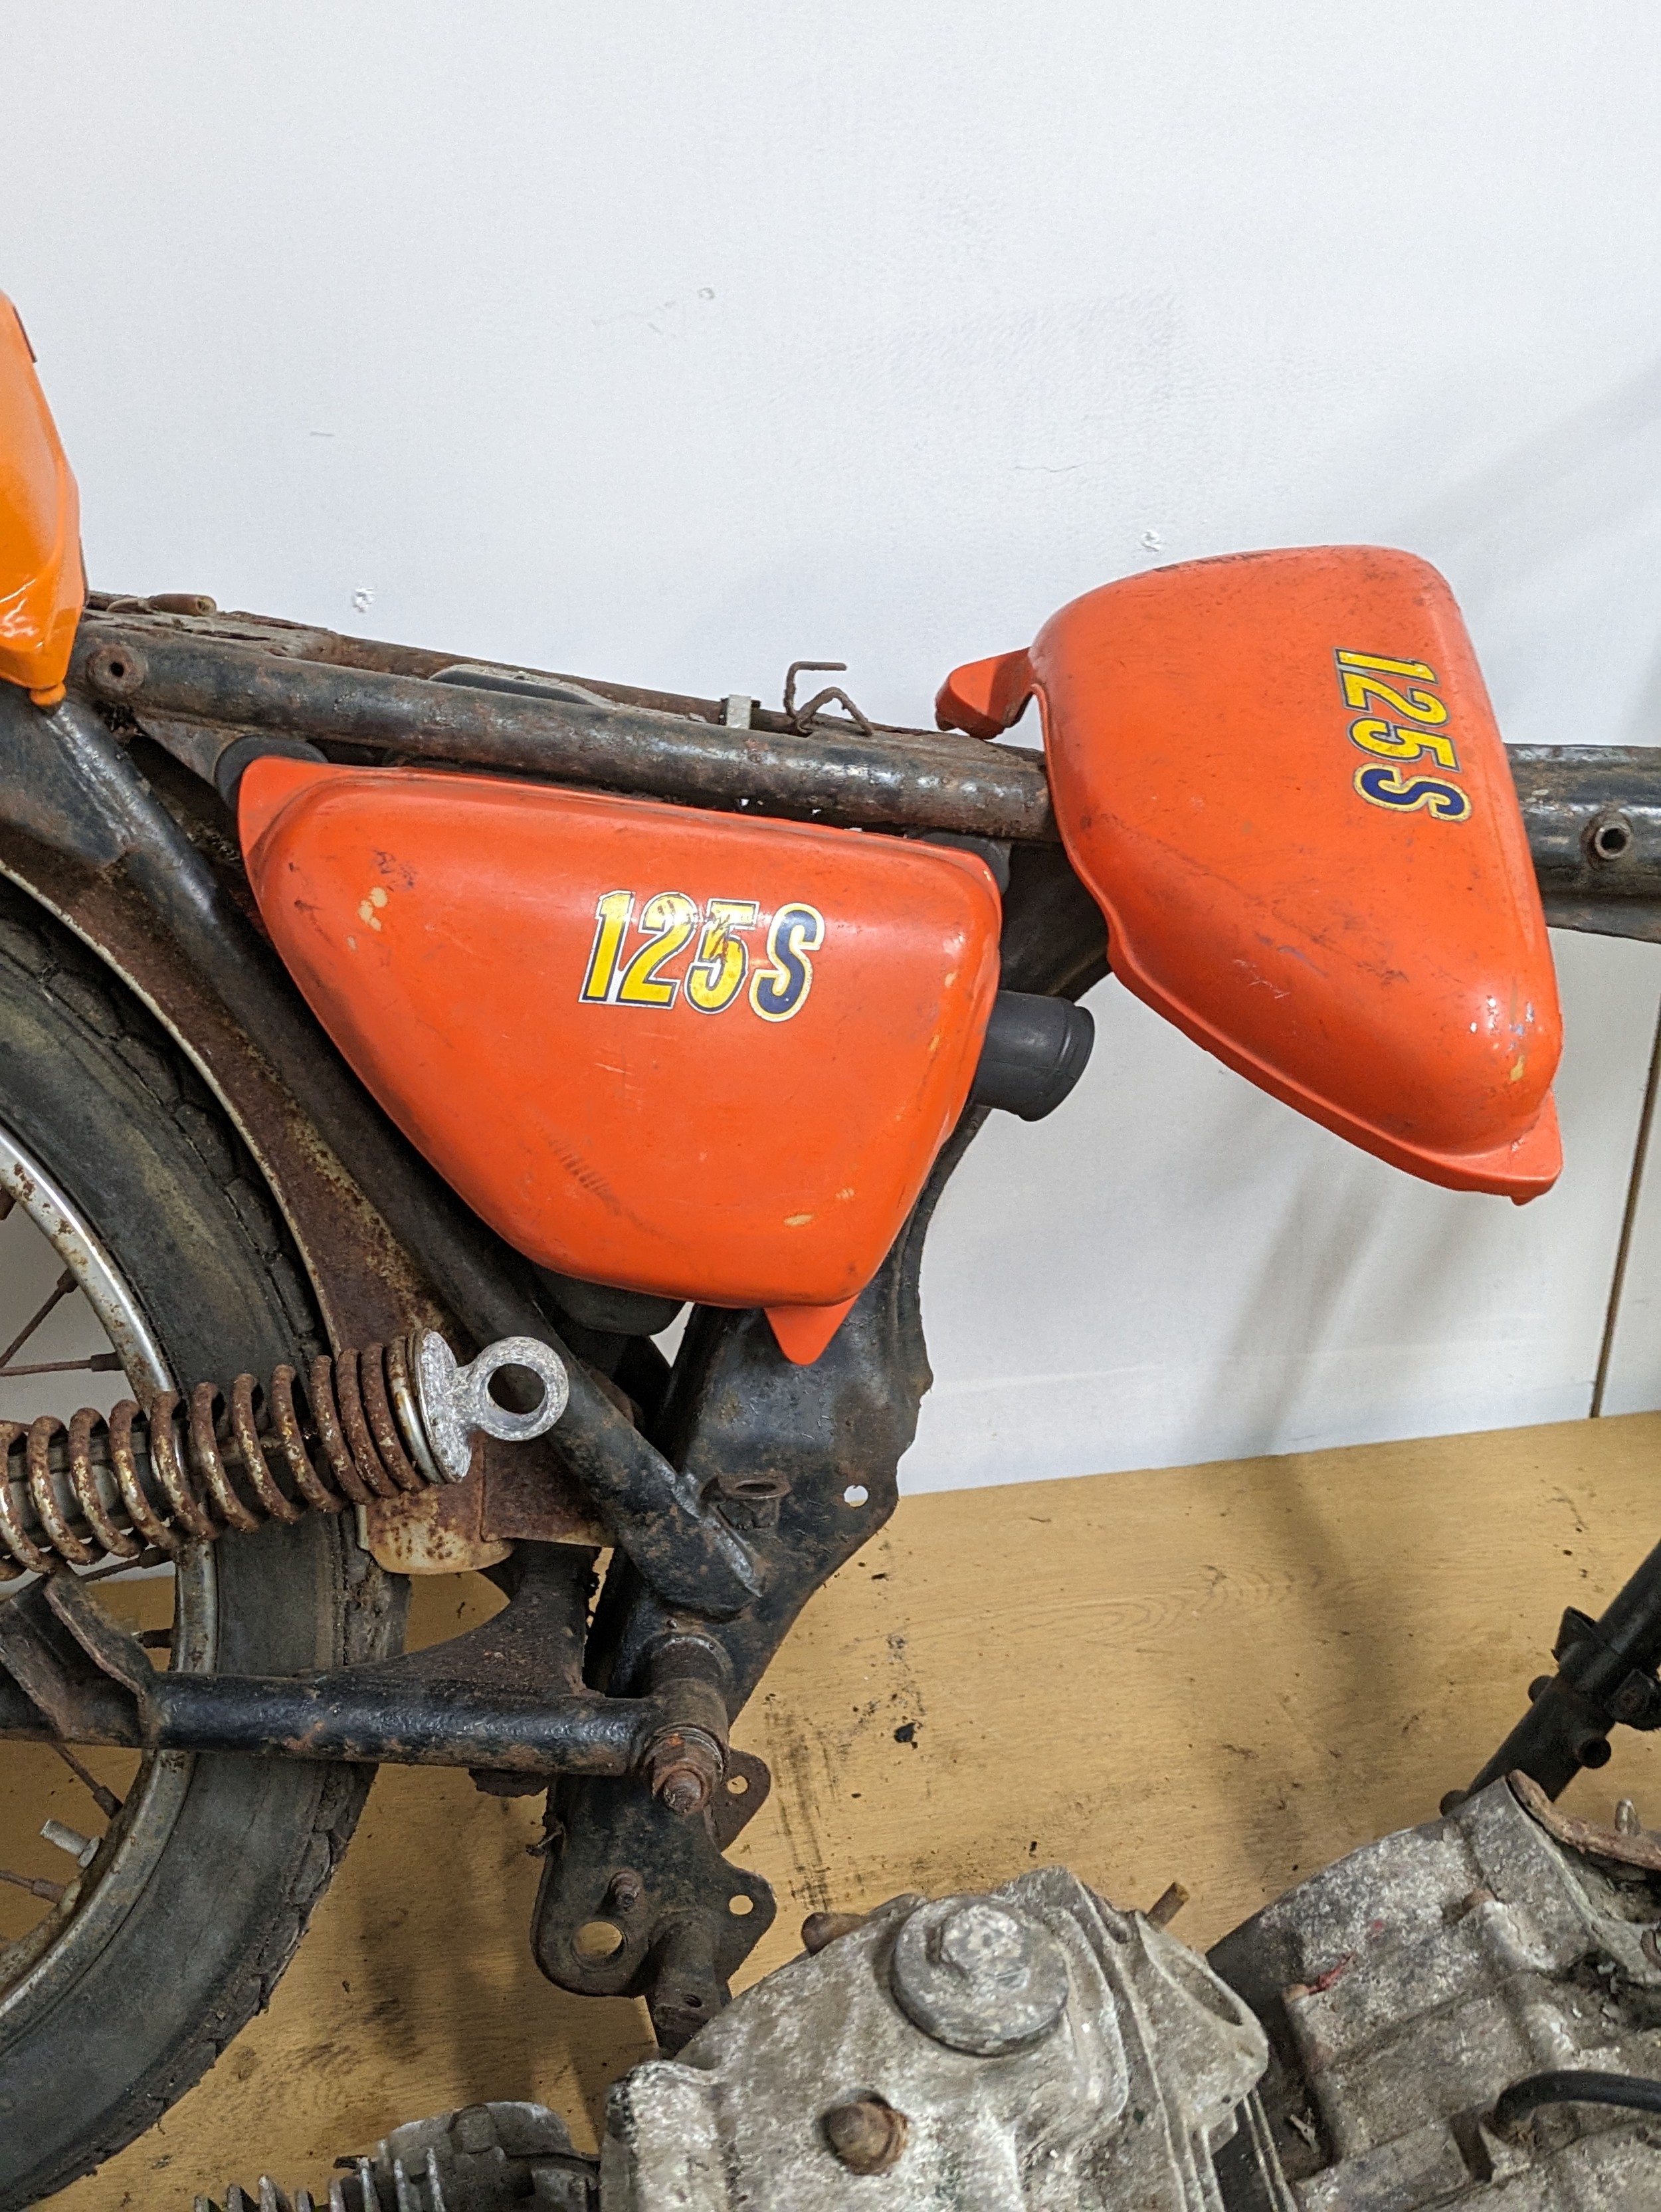 Honda CB125-S frame,3 engines and parts - Image 6 of 10